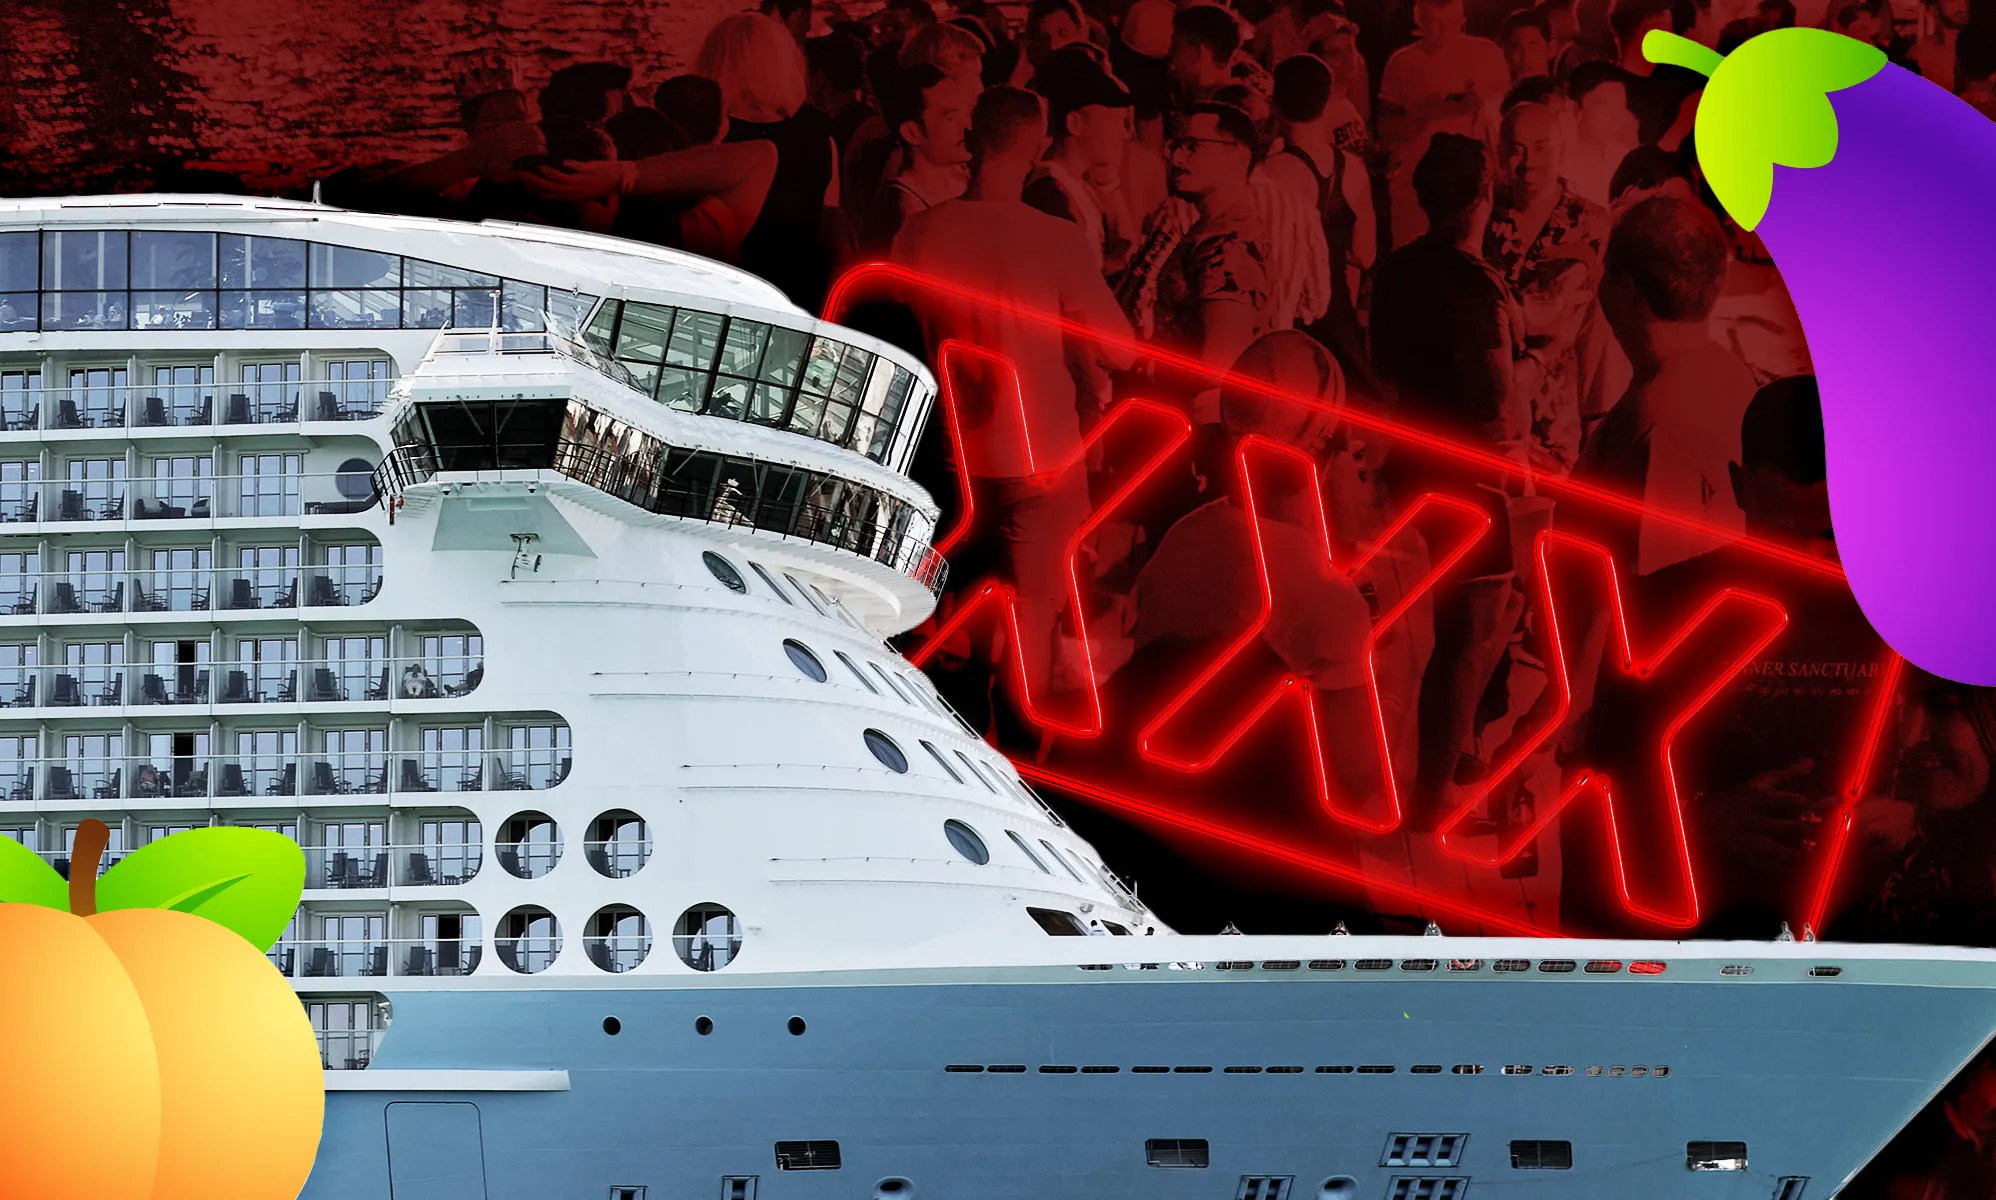 Xxx X Rep Video - Gay cruise wants guests to stop making porn on its ships